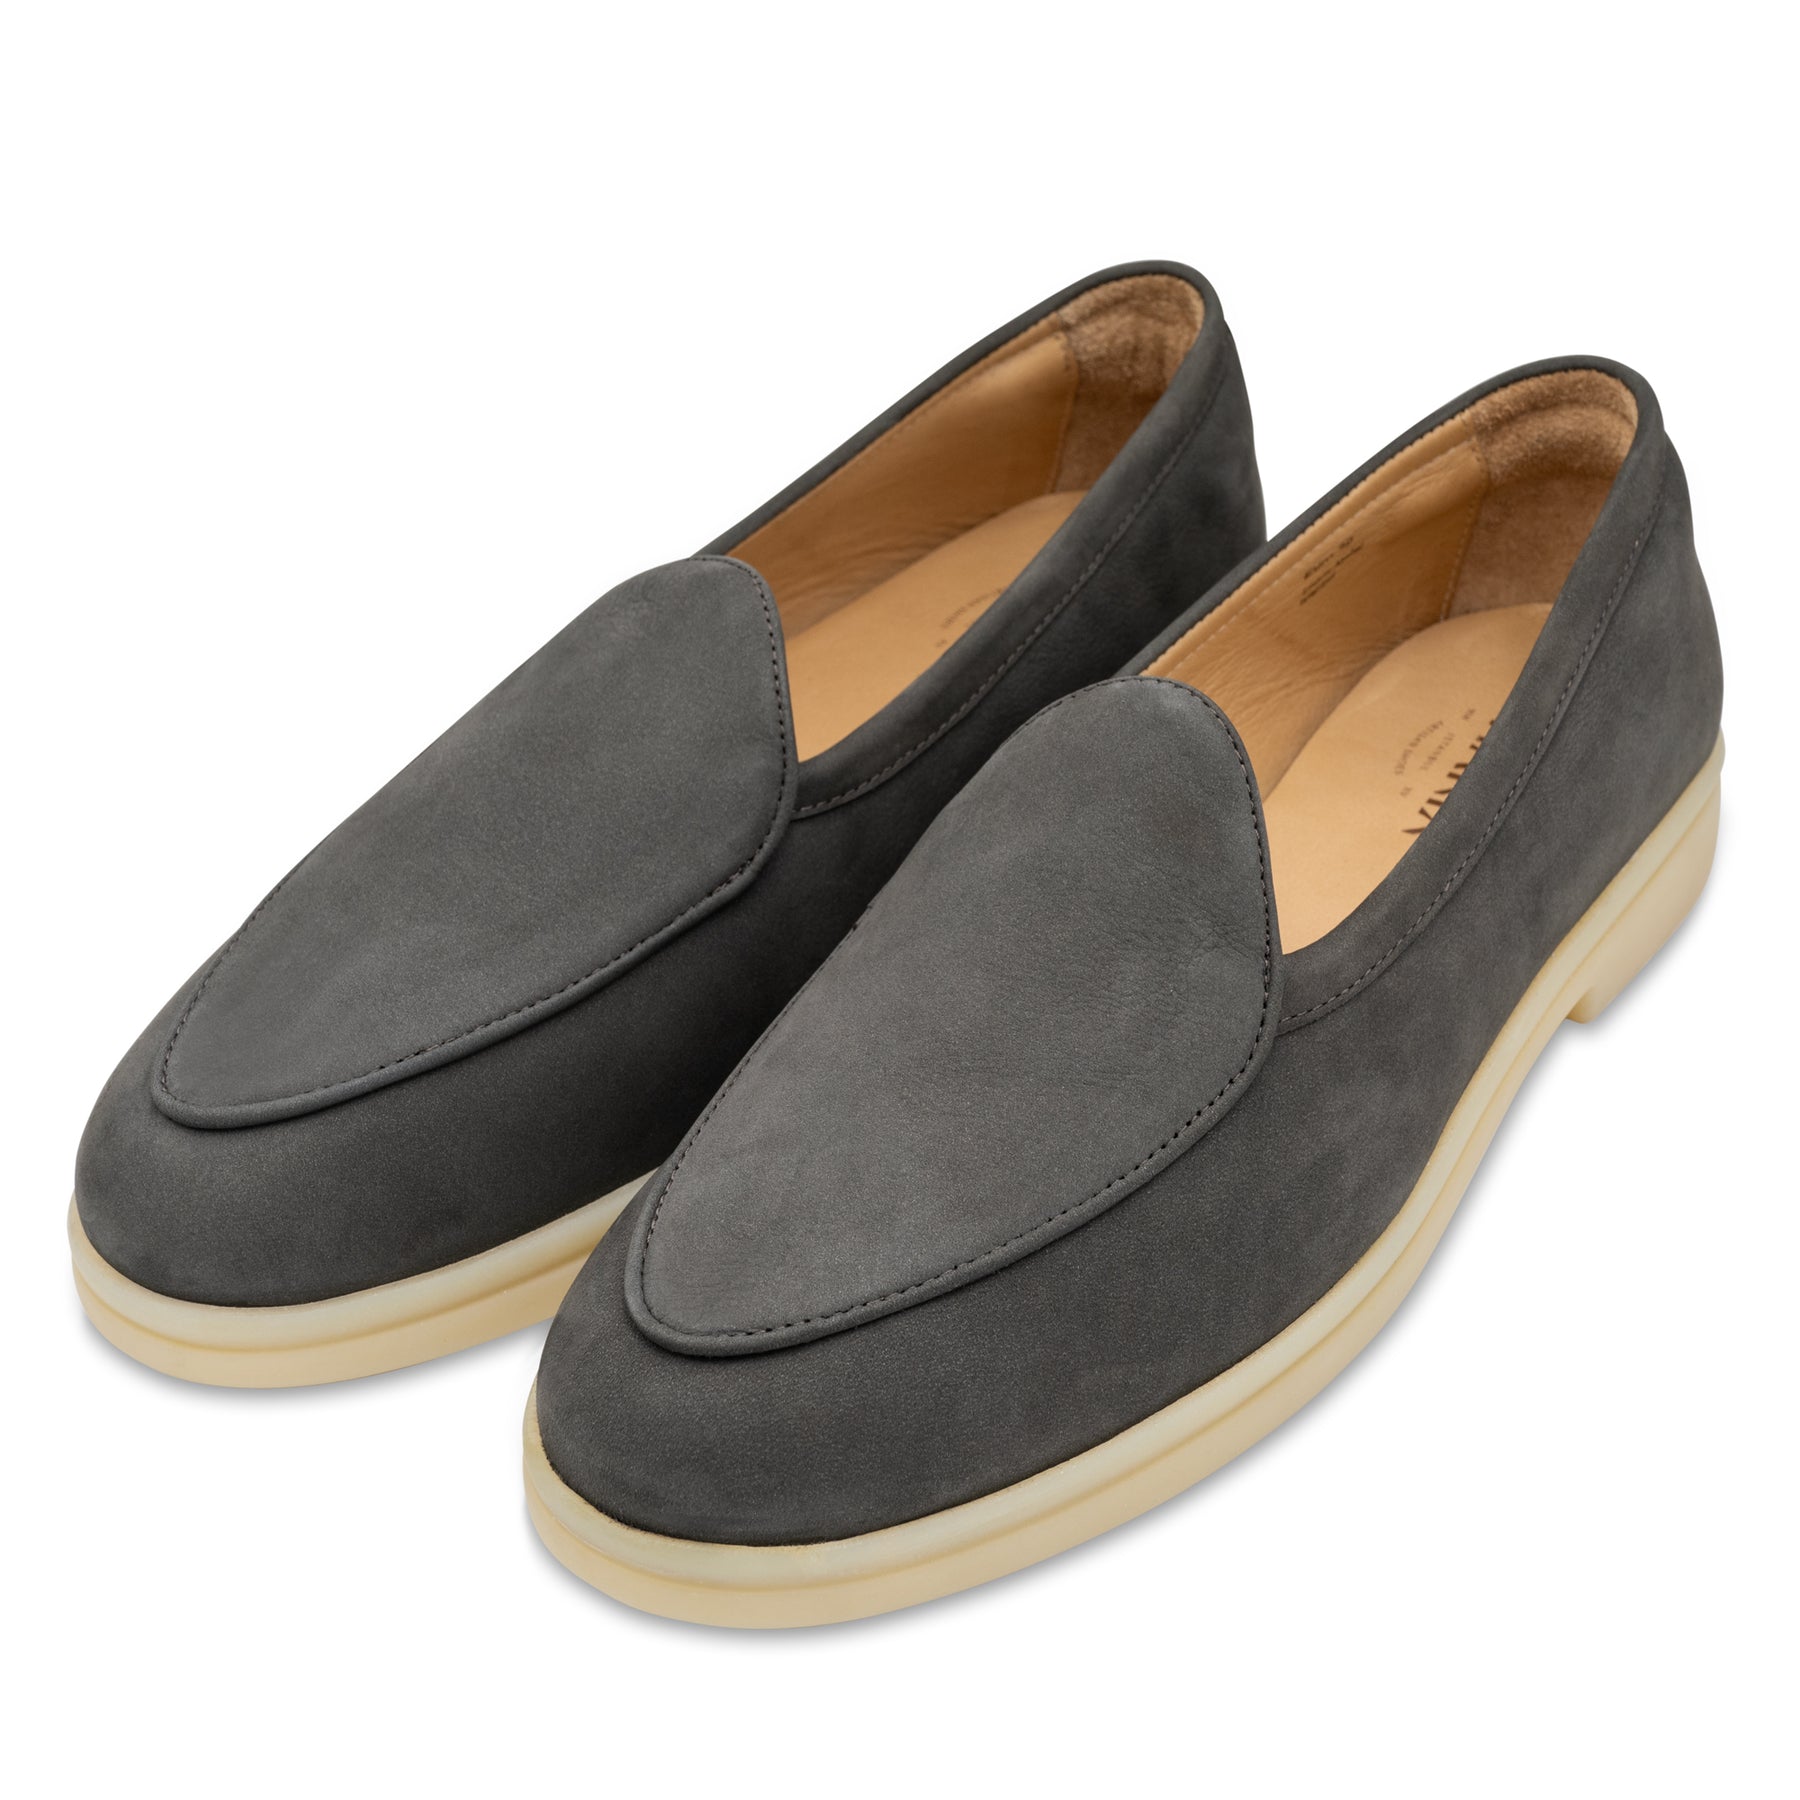 Graphite Loafers - Charix Shoes